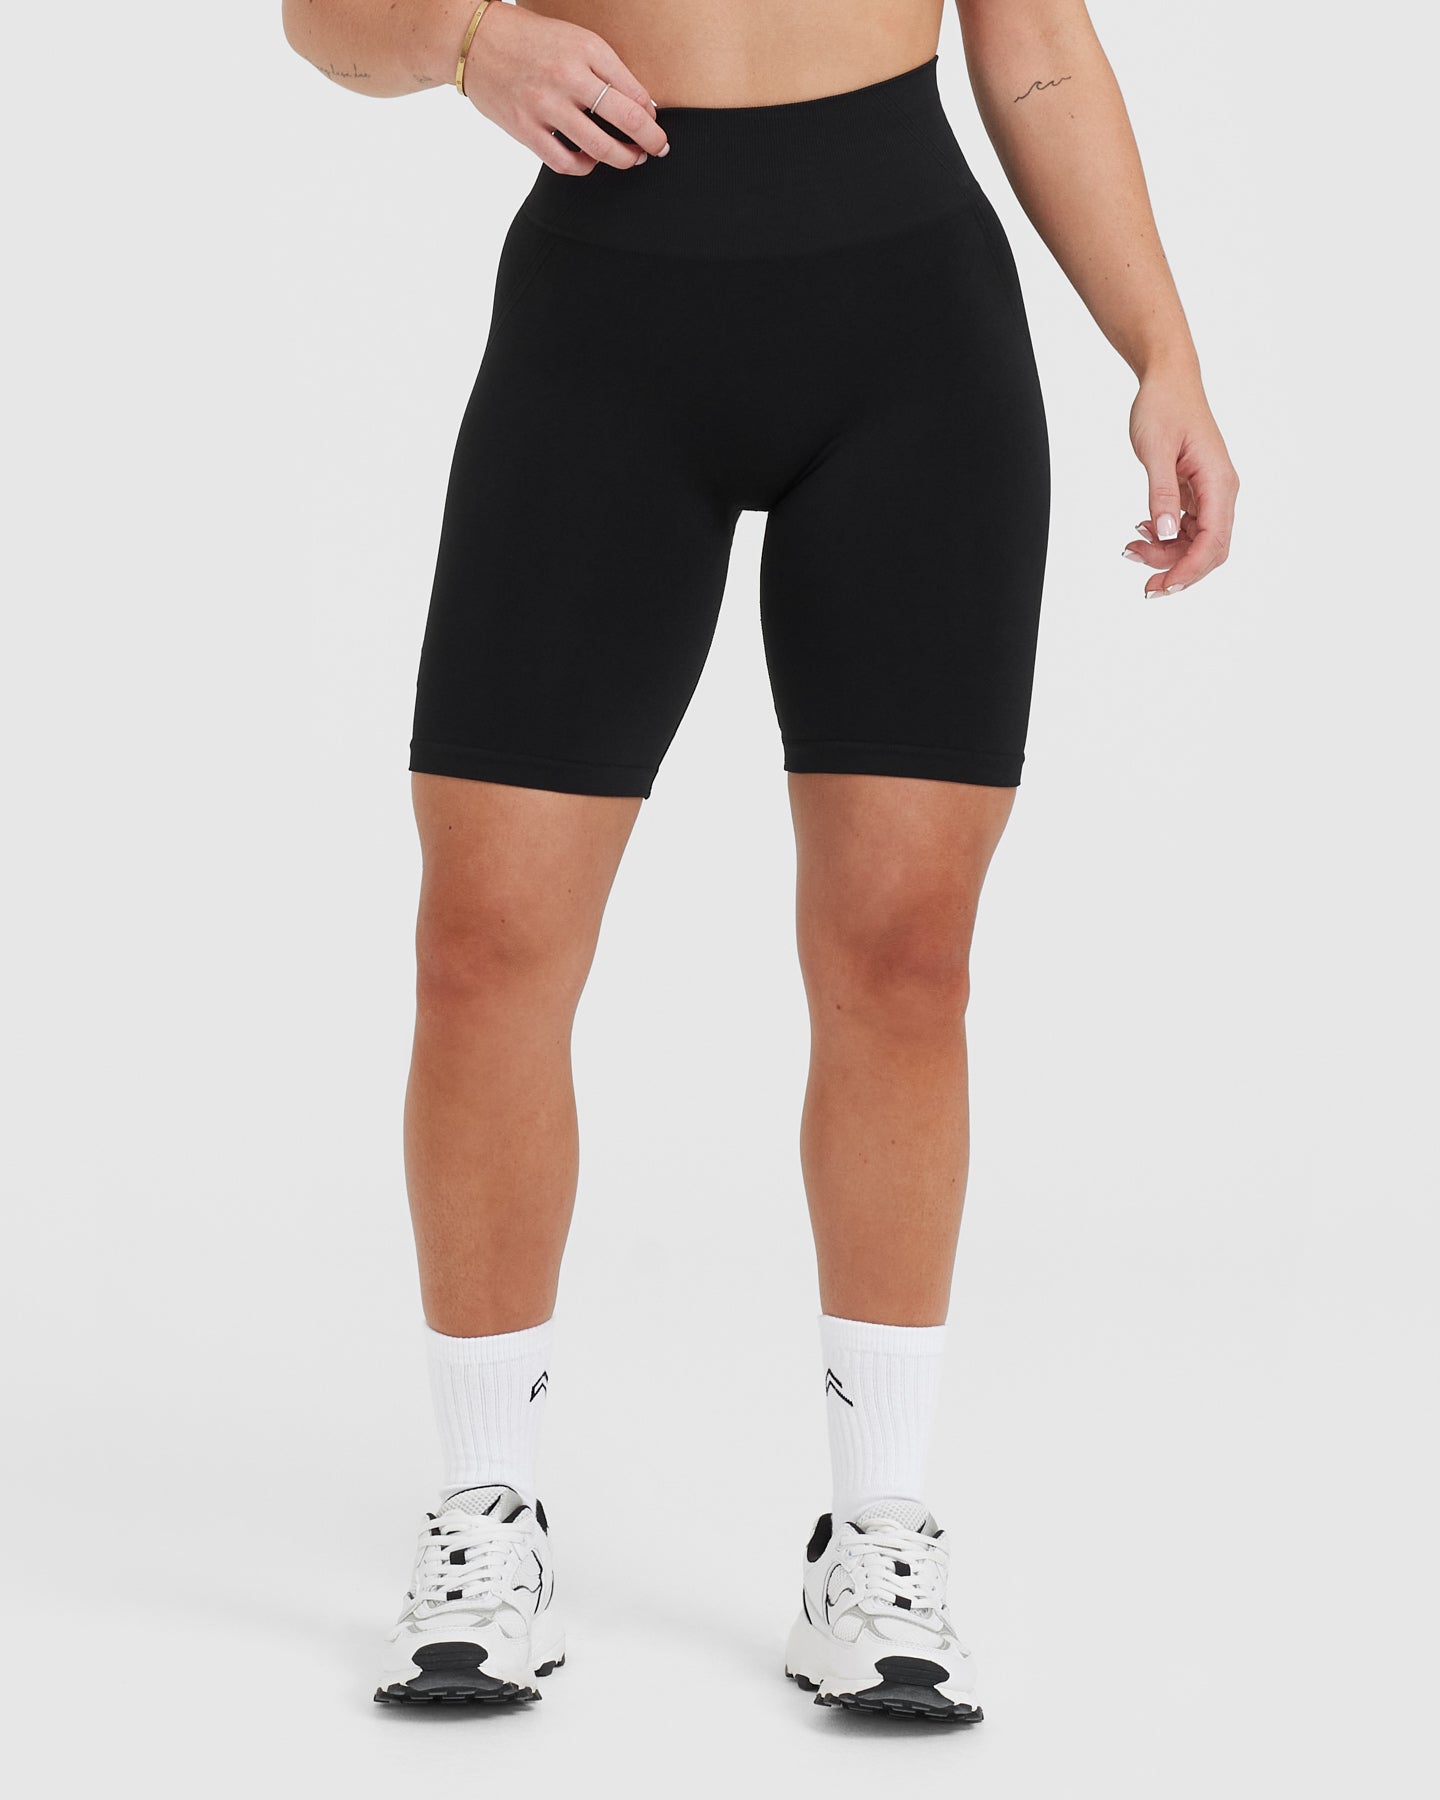 Women's Everyday Soft Ultra High-rise Bike Shorts 8 - All In